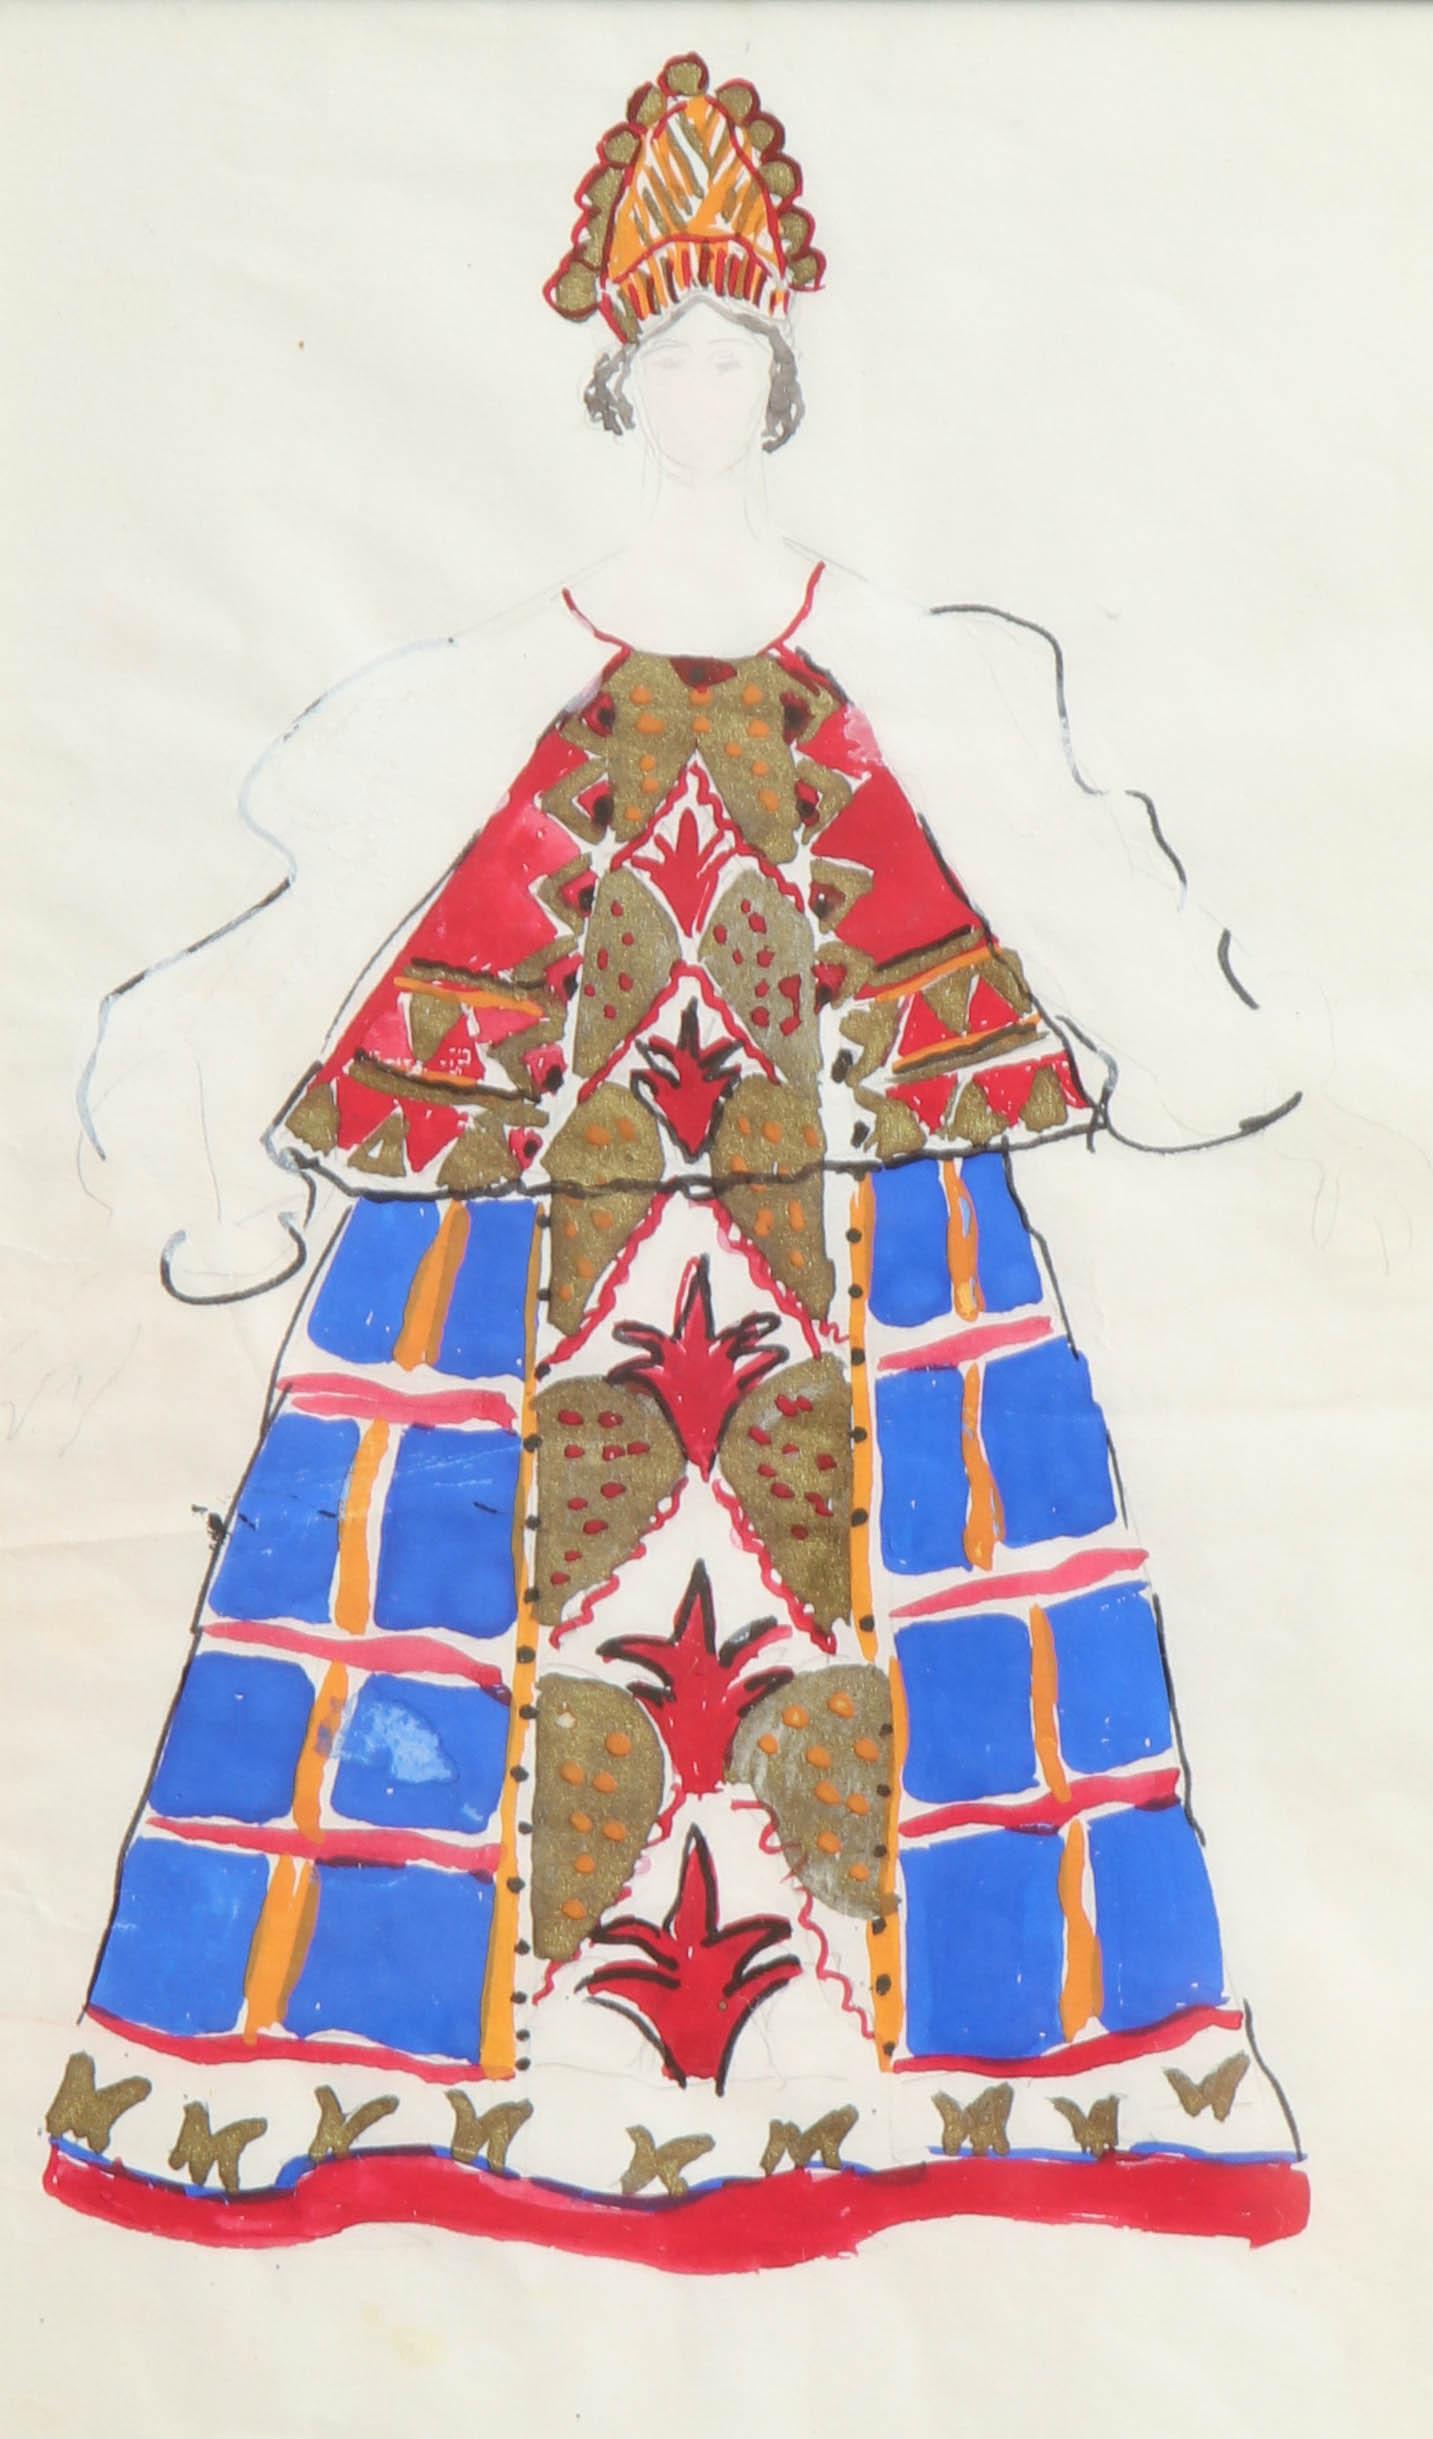 Watercolor with pencil and ink of a traditional Russian folk costume in cobalt blue, red, and gold designed for the Ballets Russes. In addition to designing costumes for the ballet company, Kachurovsky also was a lead dancer and a choreographer.